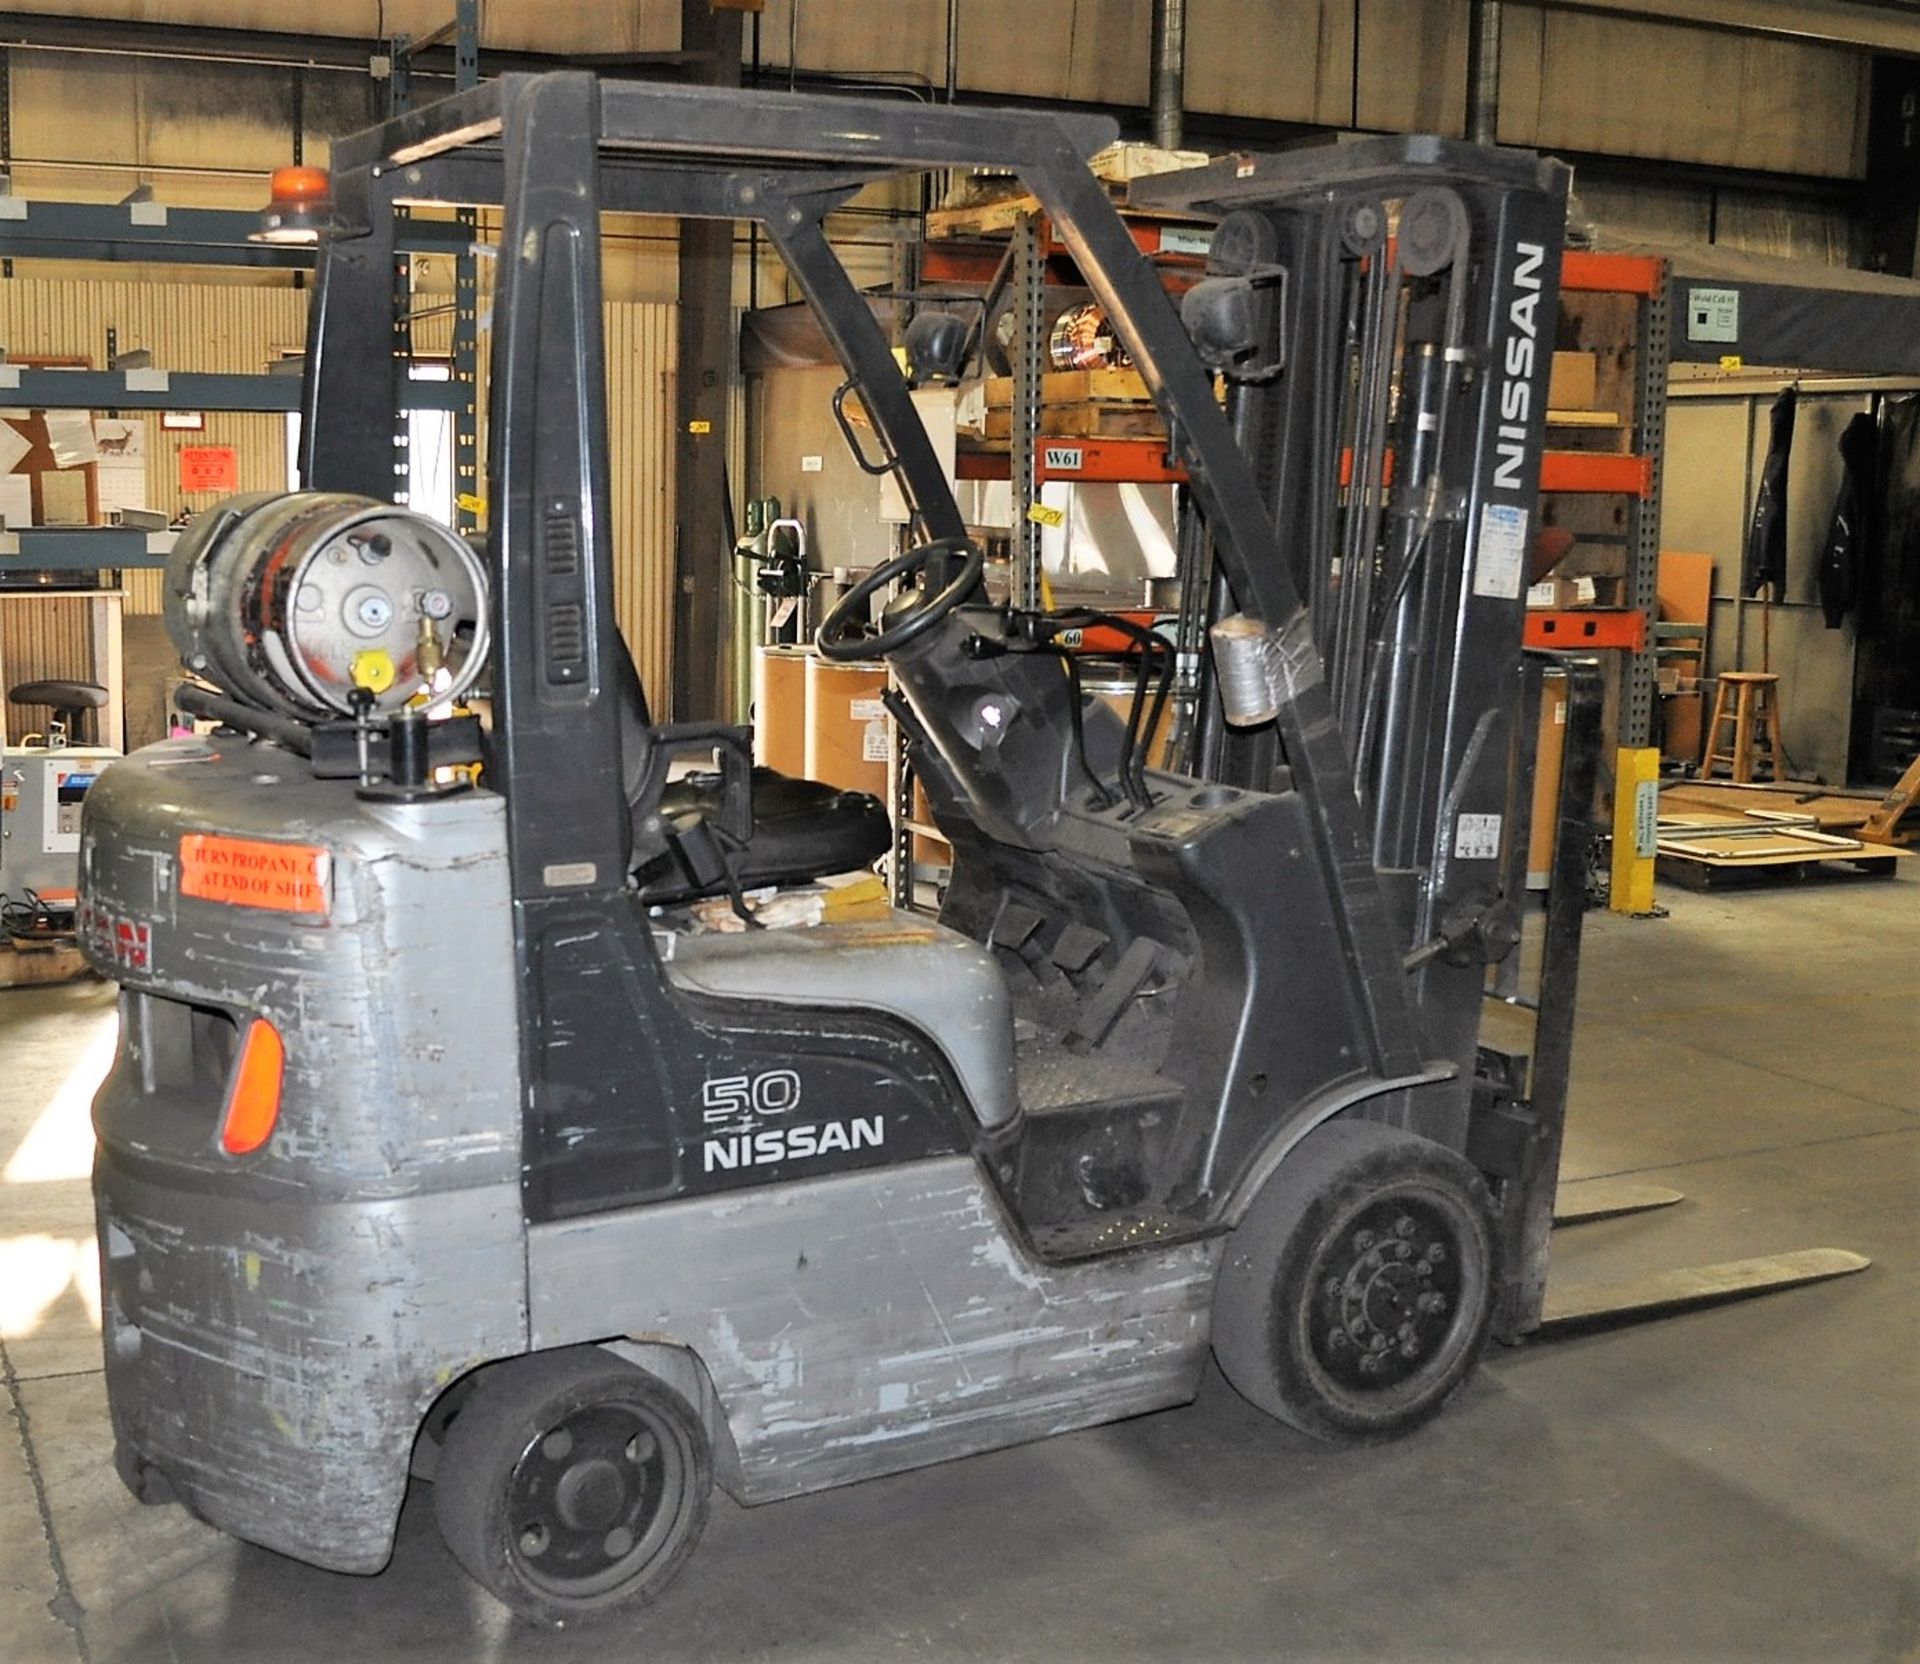 NISSAN MDL. MCPL02A25LV 3150# CAPACITY PROPANE FORKLIFT TRUCK, WITH 187" LIFT, SOLID TIRES, SIDE - Image 3 of 5